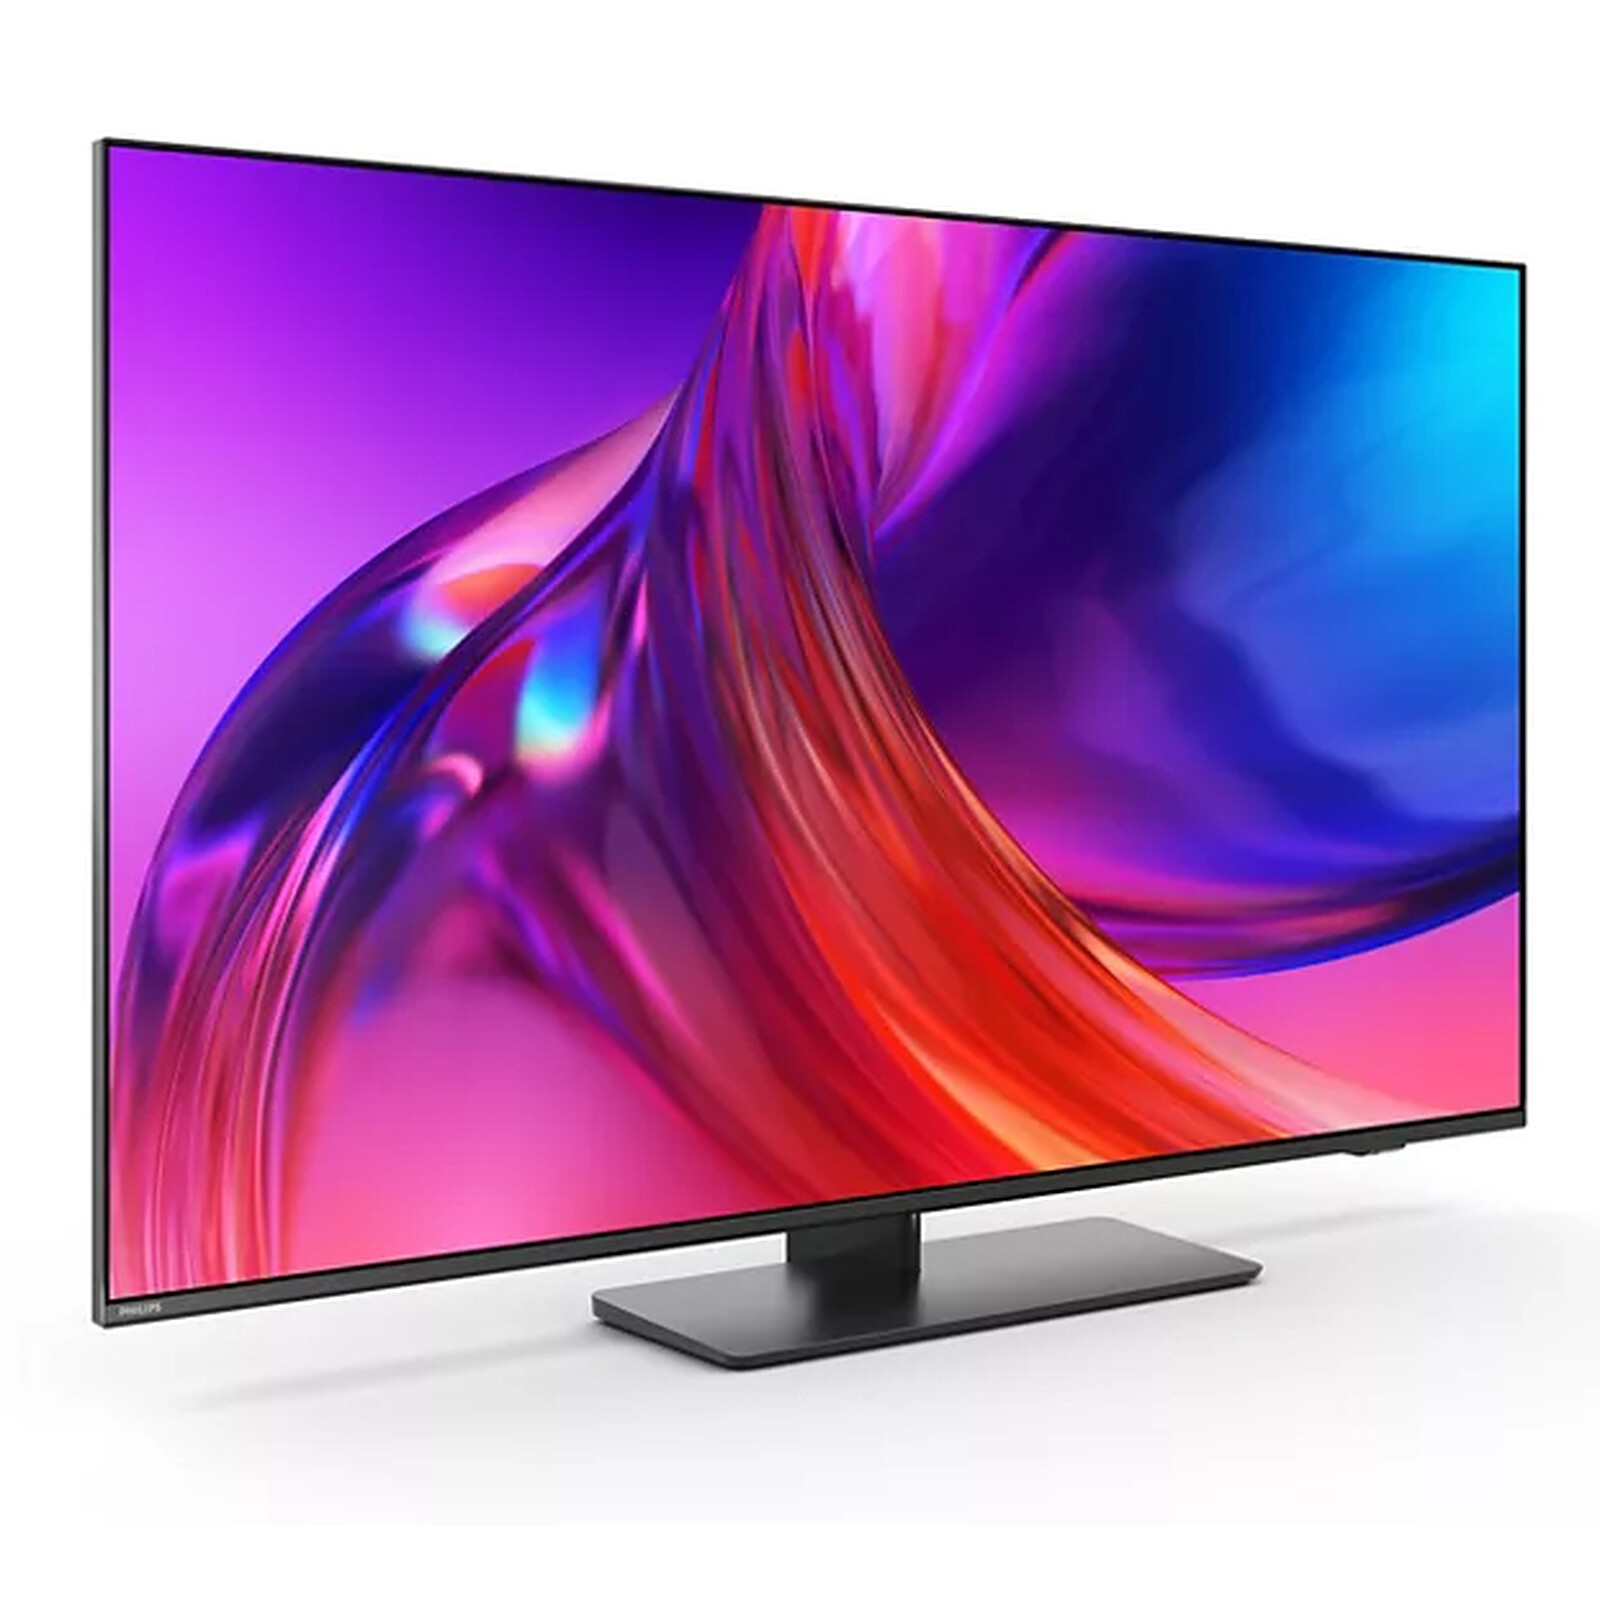 Philips The One 50PUS8808/12 - TV - LDLC 3-year warranty